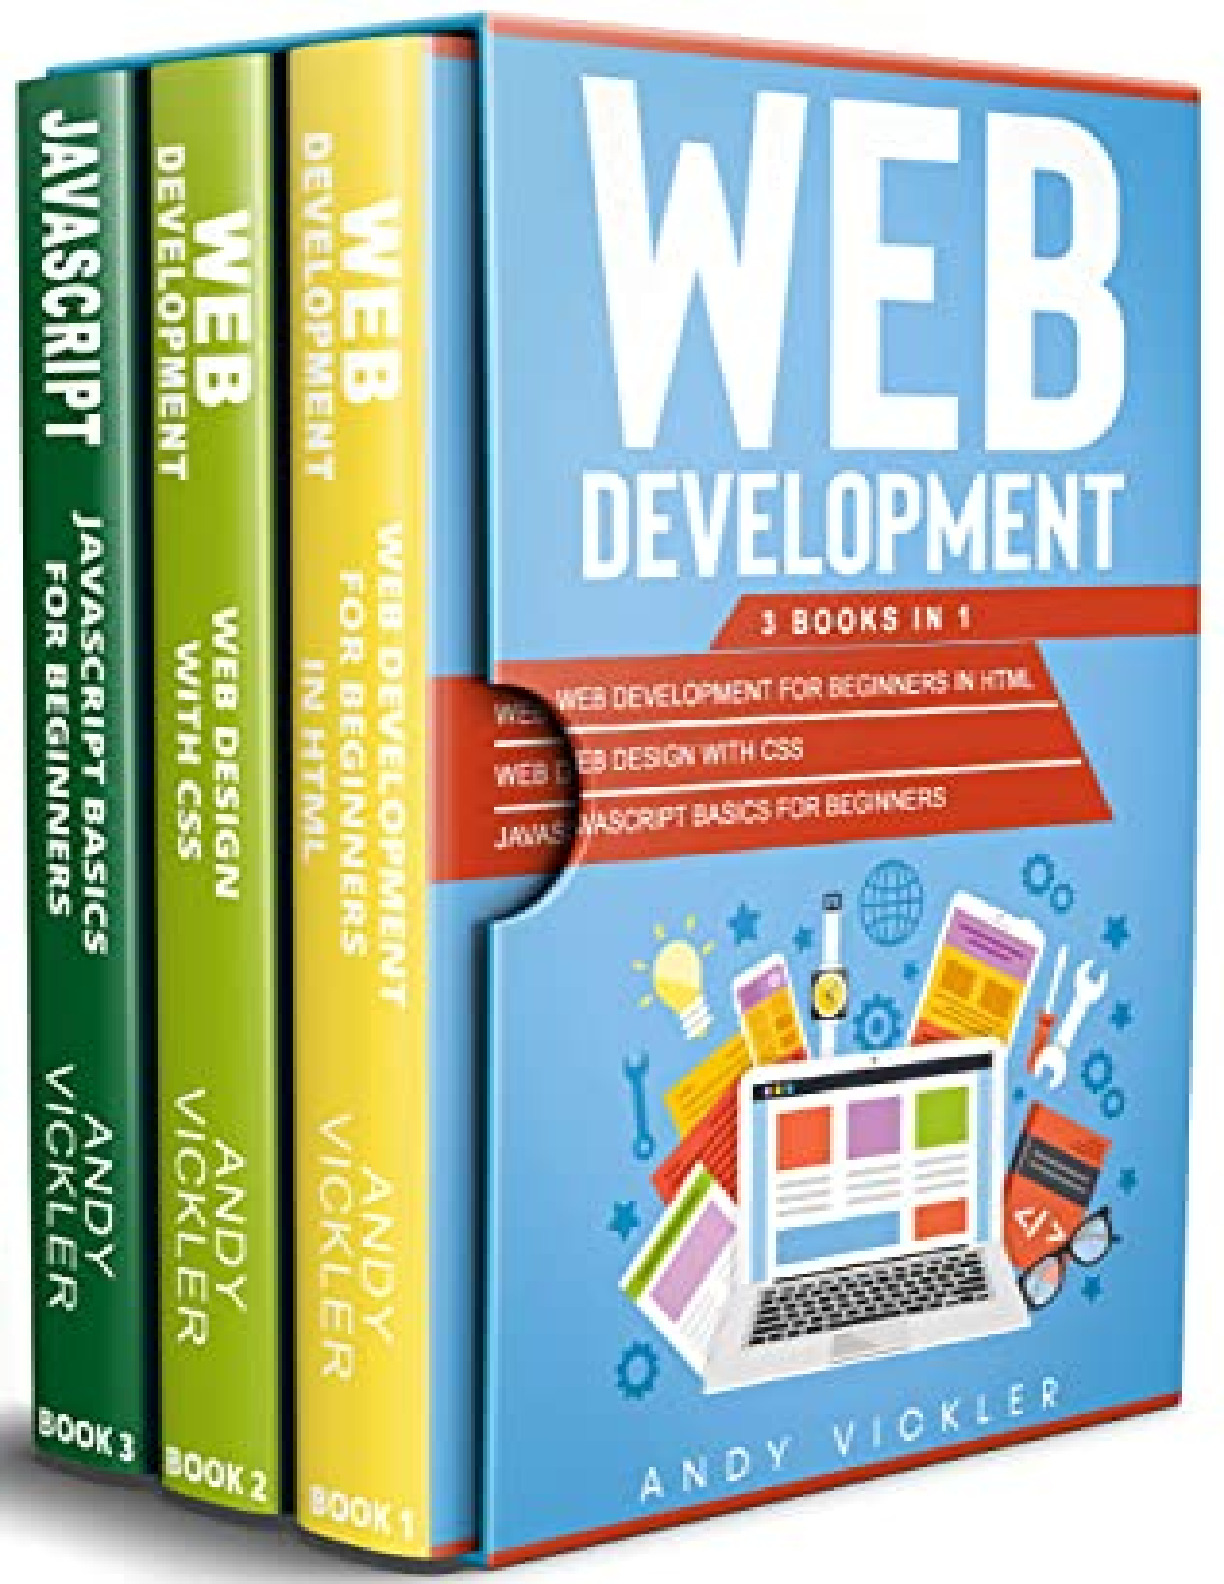 Web Development 3 Books in 1  Web Development for Beginners in HTML + Web Design With CSS + Javascript Basics for Beginners (Andy Vickler [Vickler, Andy]) (z-lib.org)